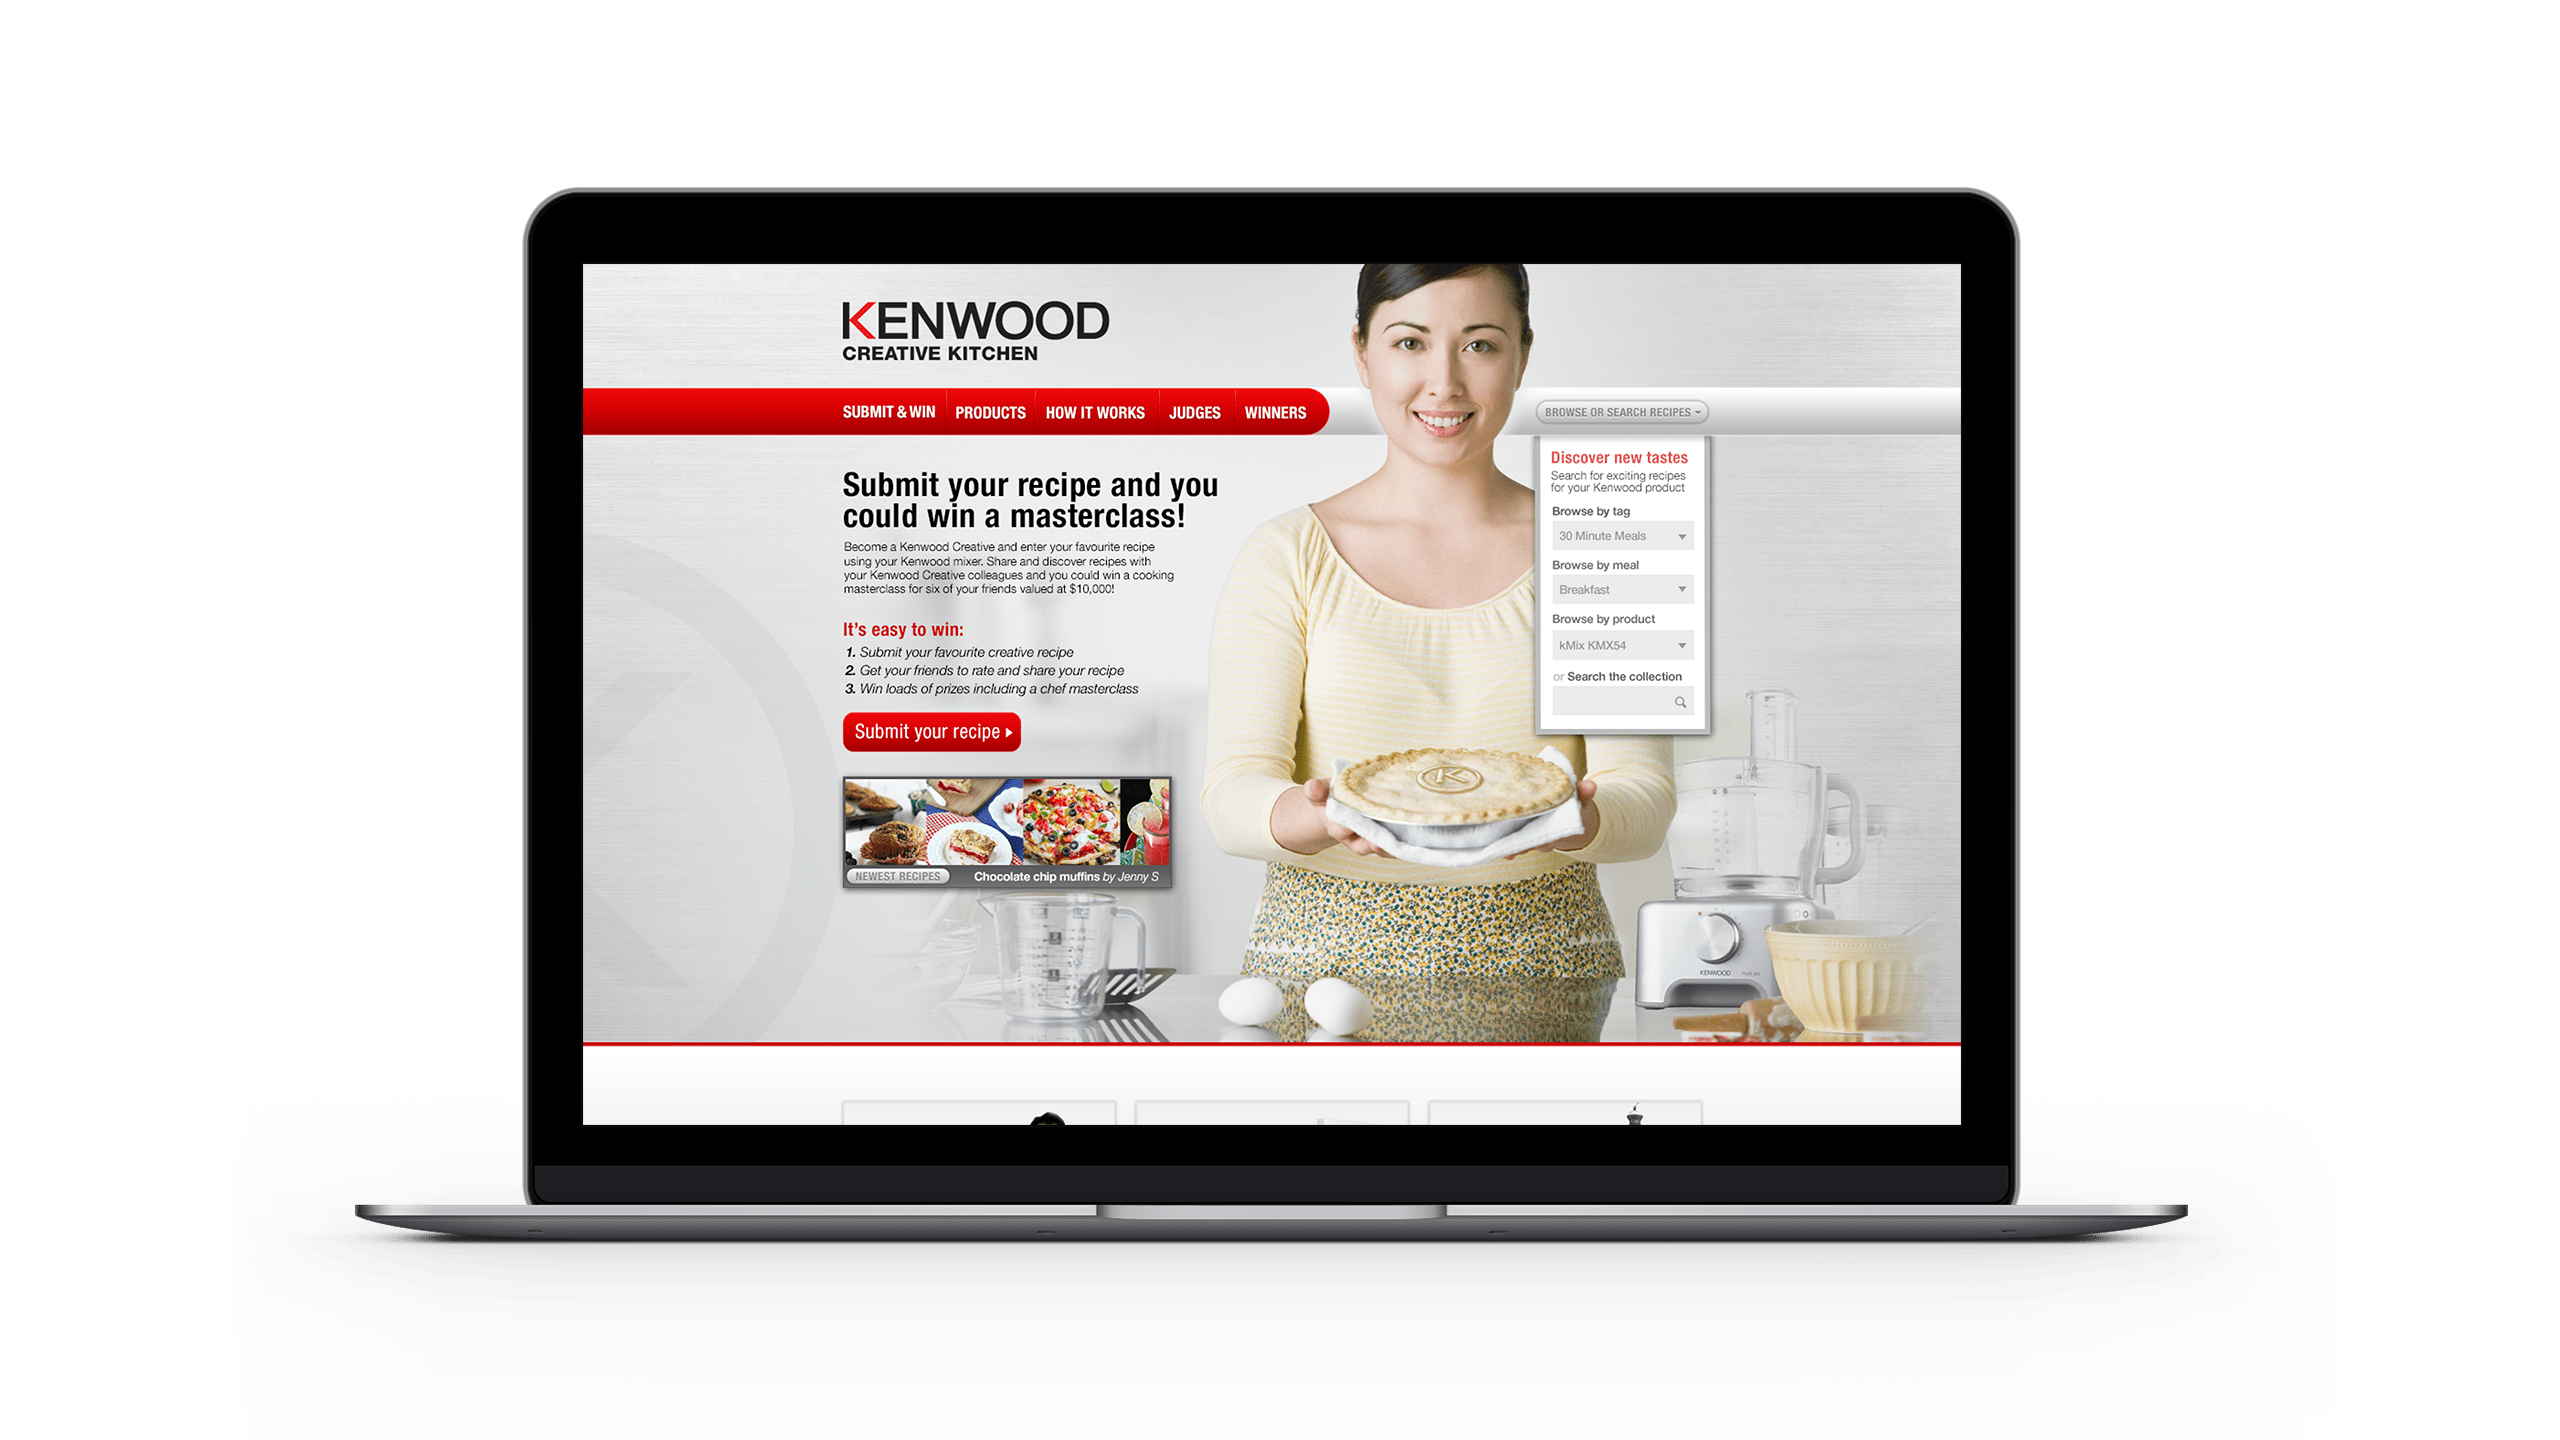 Laptop showing the Kenwood Creative Kithcen home page